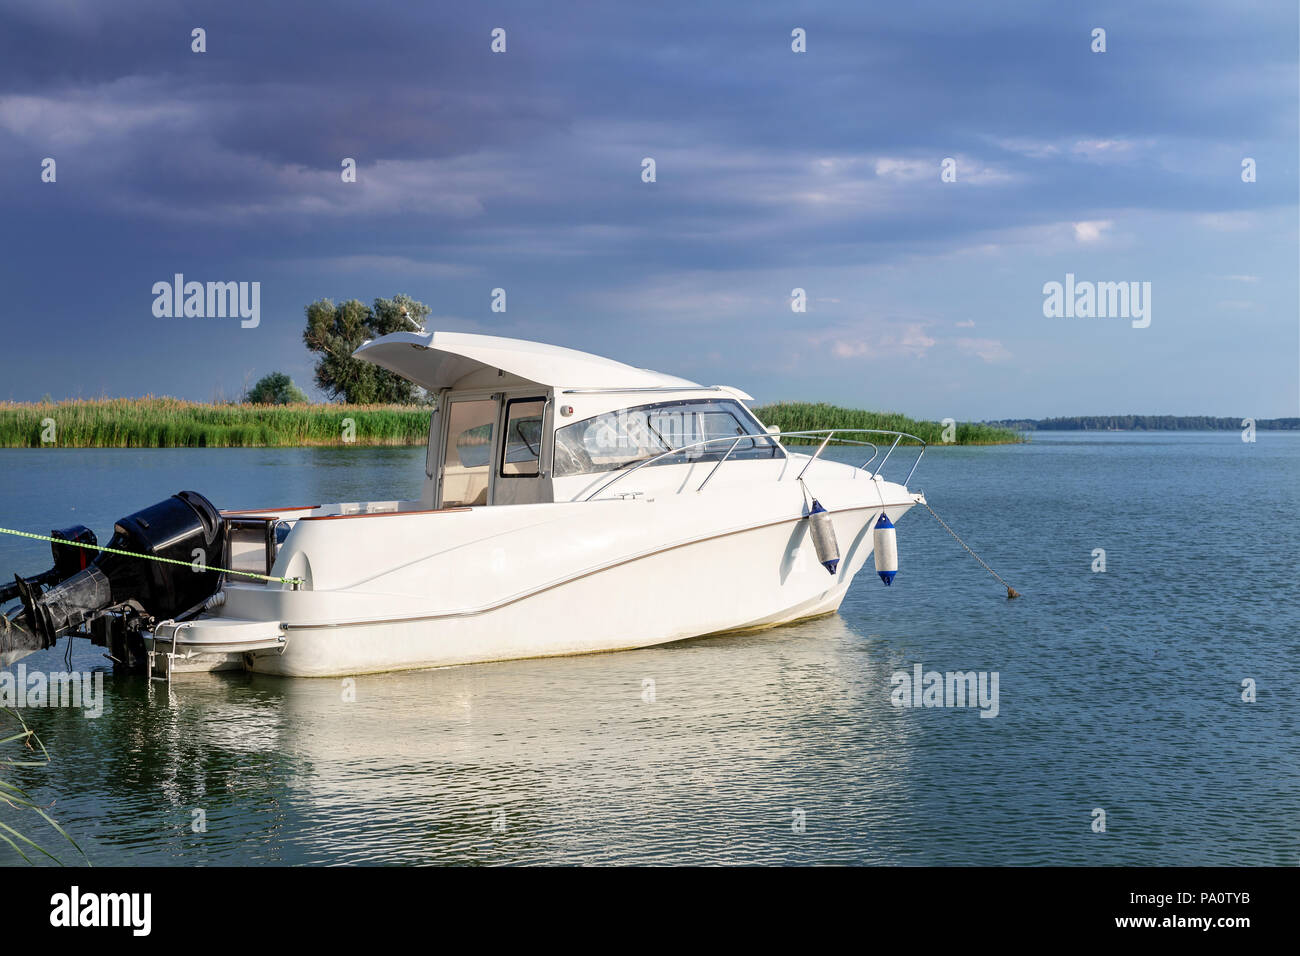 Luxury fishing motor boat moored at coast in bay on river or lake. Dark stormy sky with thunder clouds on background. Travel and recreation , bad weat Stock Photo